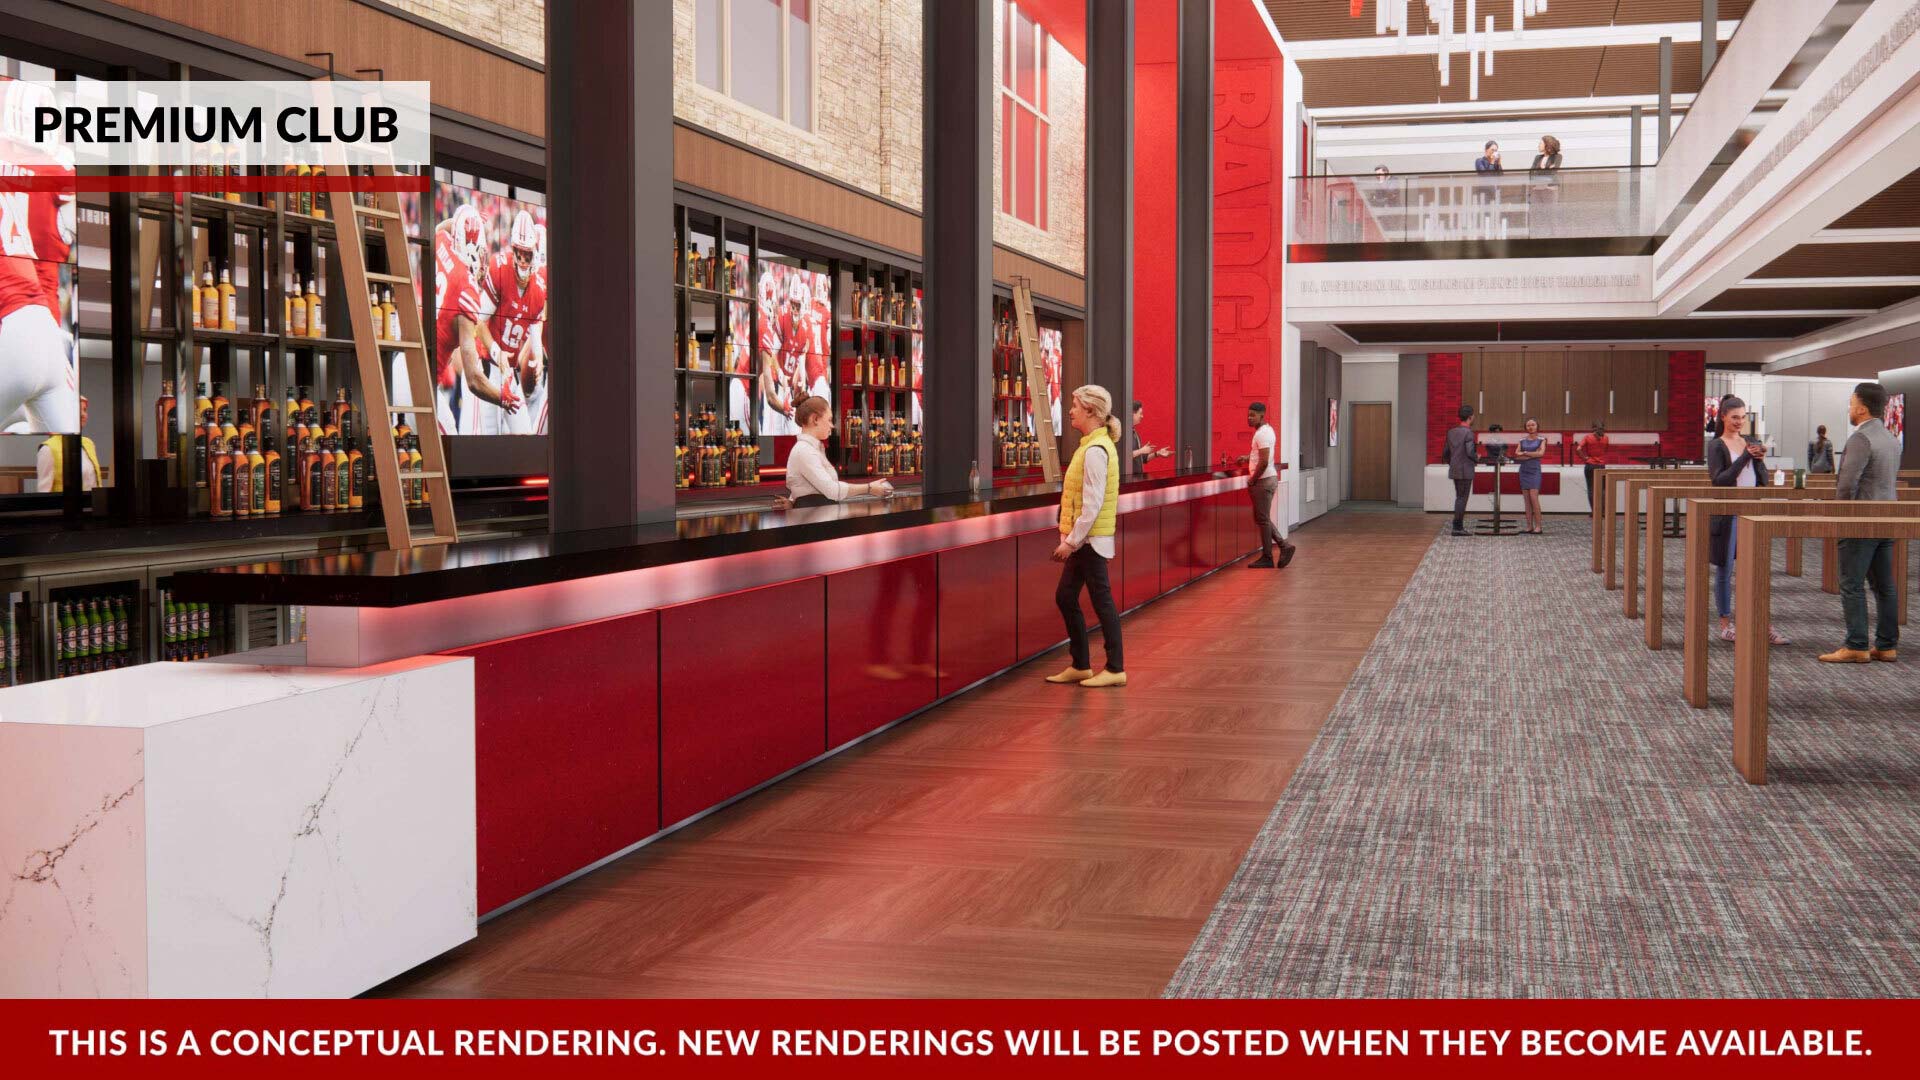 A render of the beverage area of the inside of the premium club area.